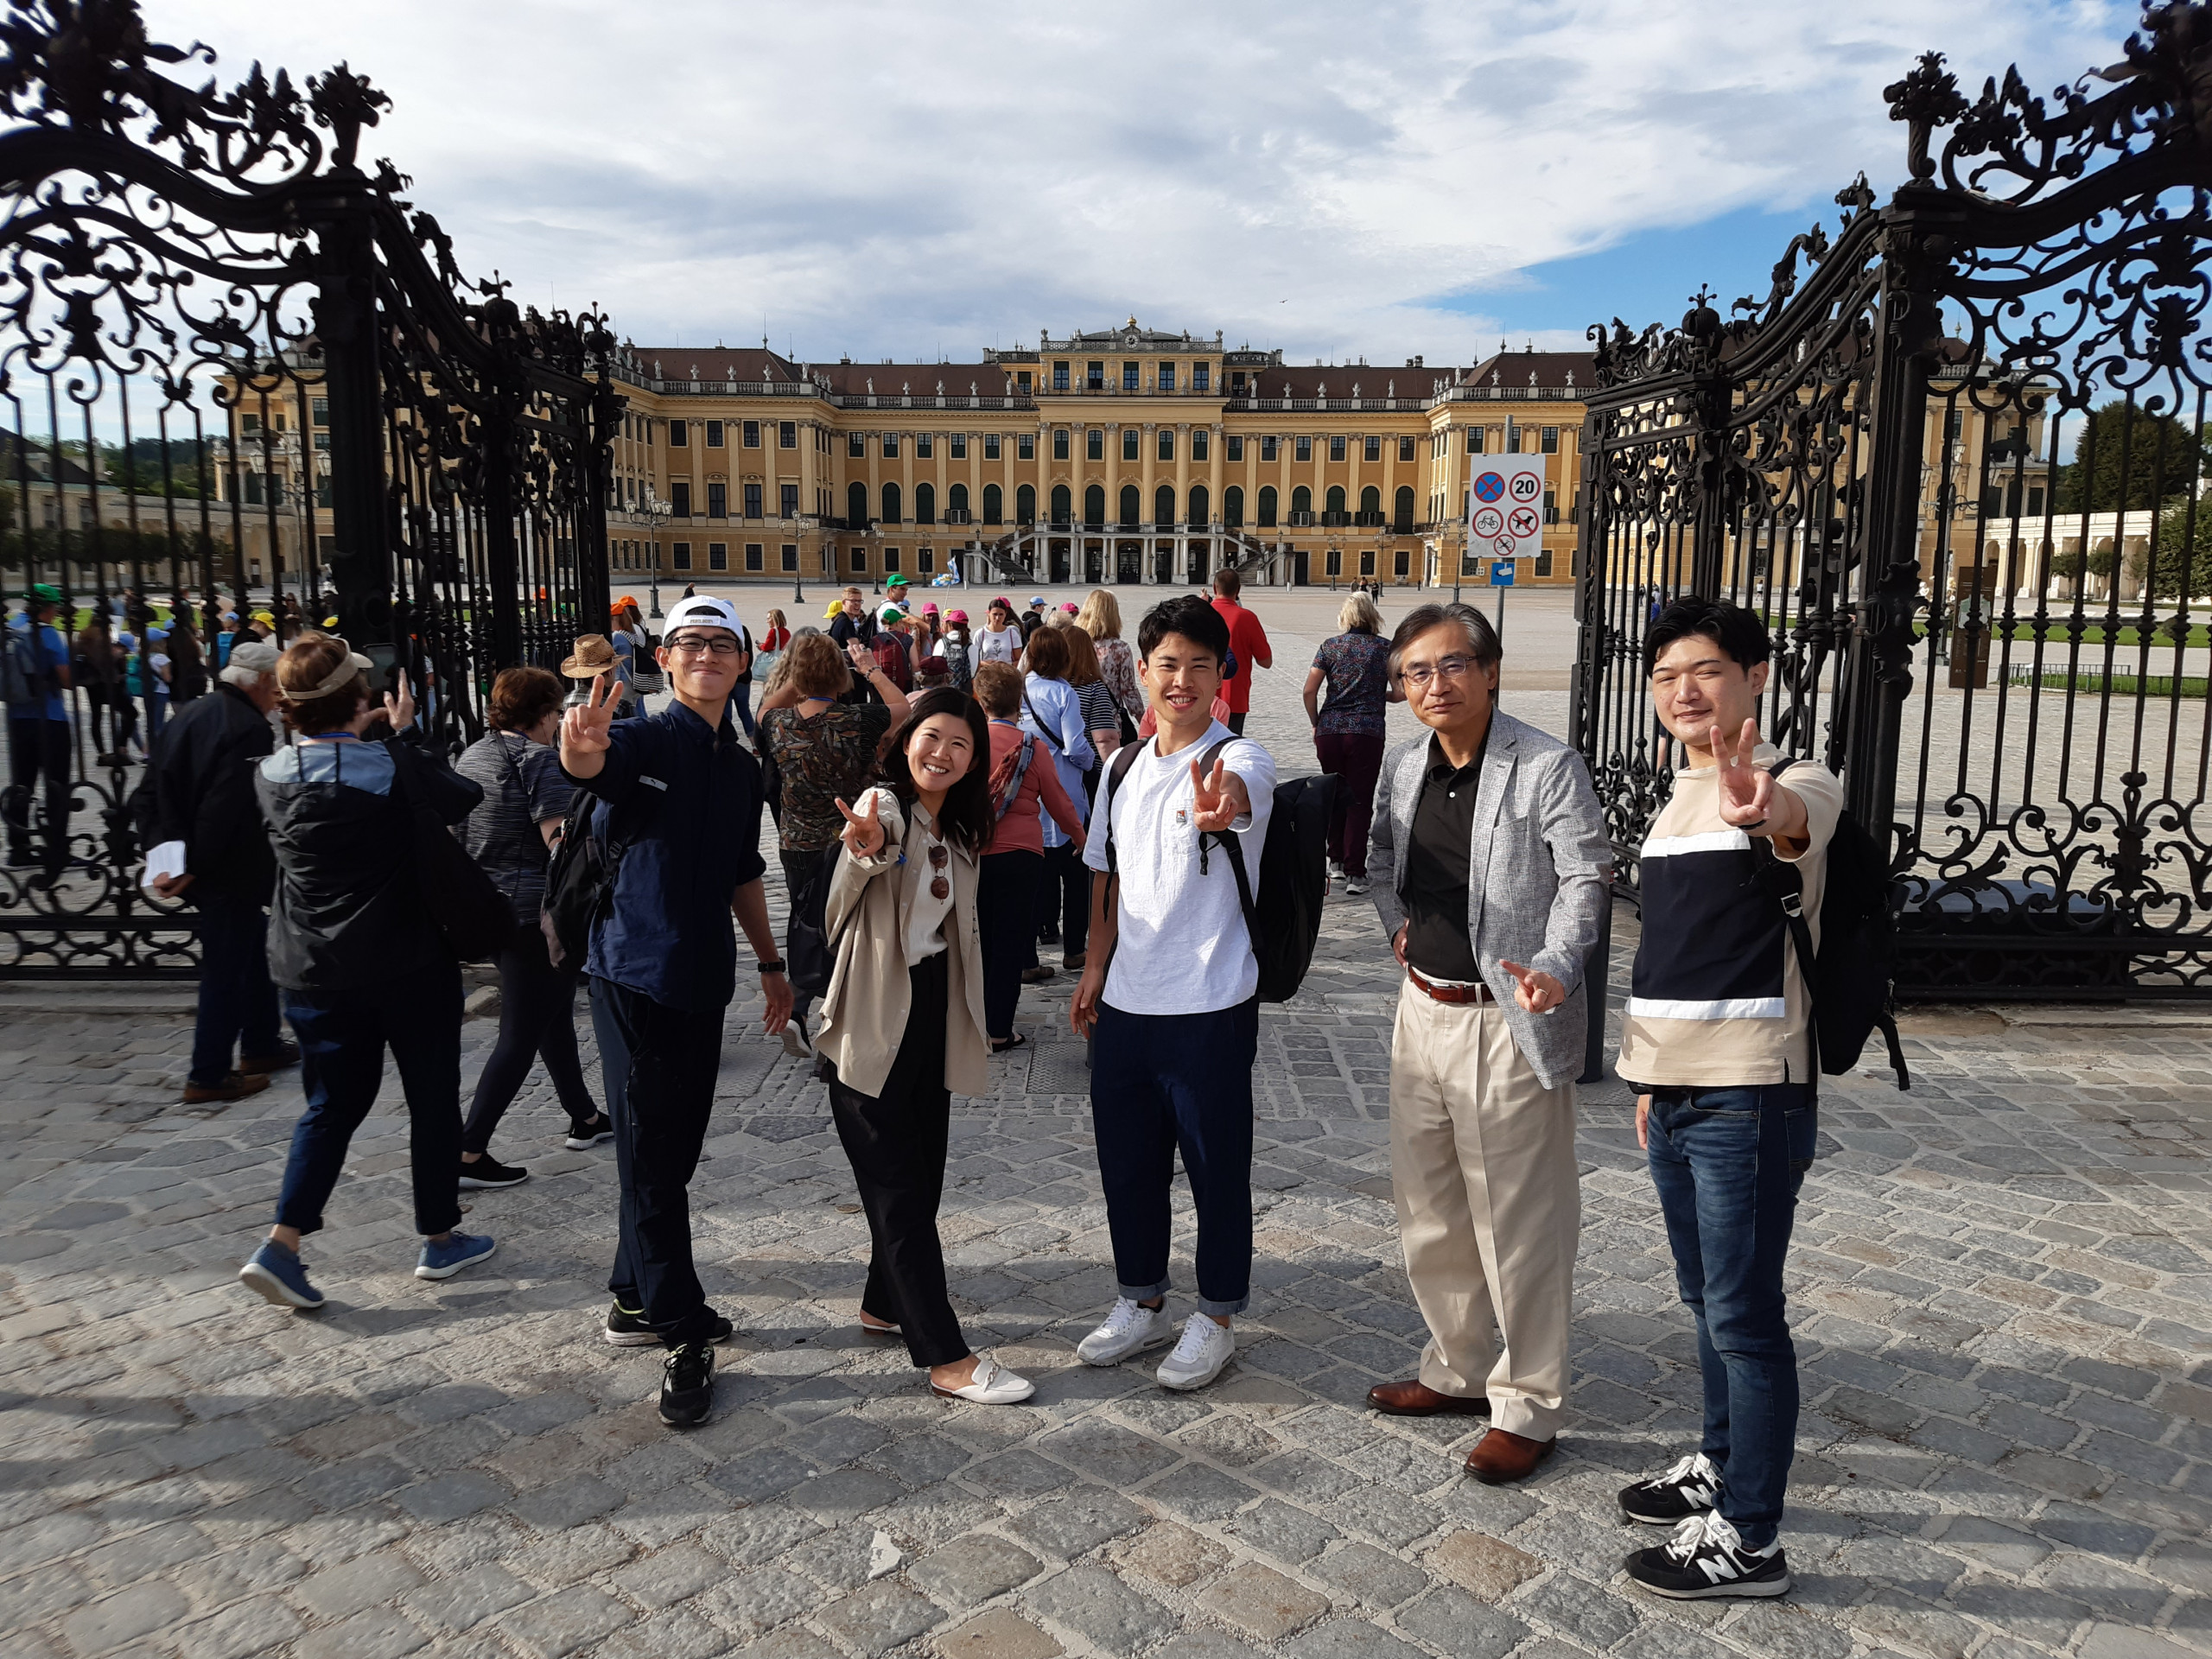 Japanese Japanese students visiting Austria in 2022.visiting Austria in 2019. Photo: Yasuaki Kimoto